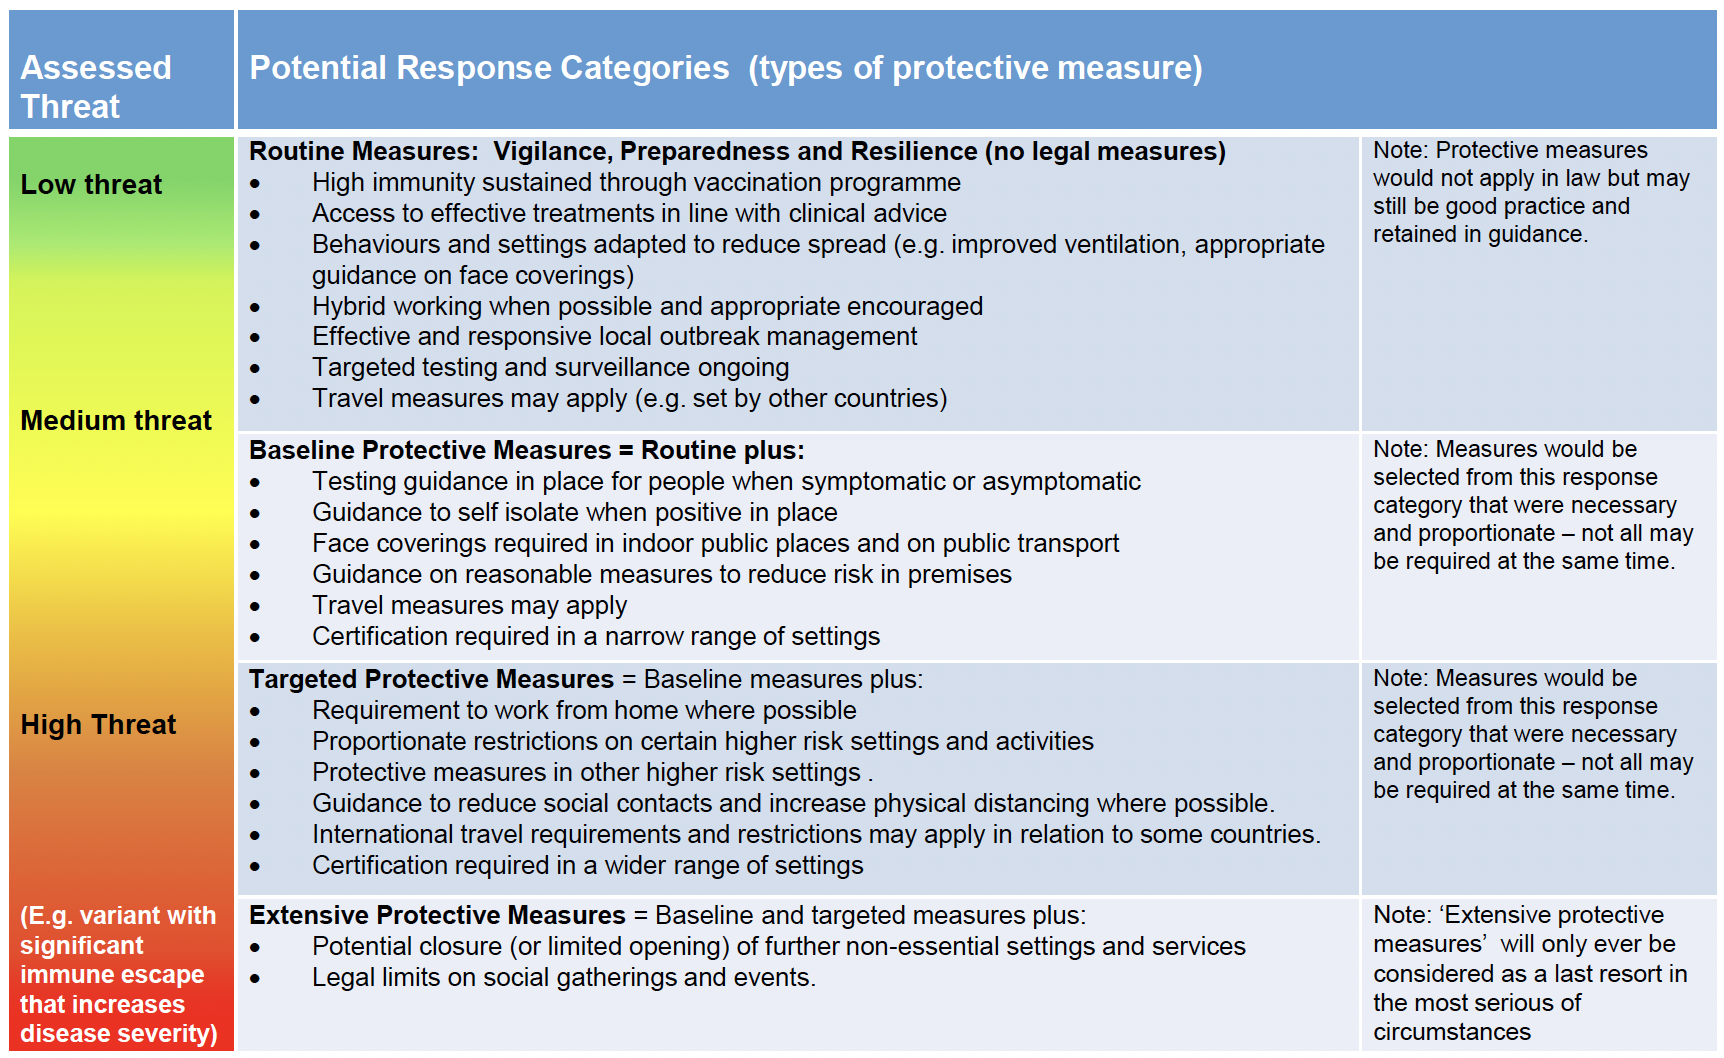 Table showing potential response categories and the potential measures that could be implemented depending on the assessed threat level. The threat levels are low threat, medium threat and high threat. A low threat level would likely see no legal measures in place, and instead a greater focus on routine measures to support vigilance, preparedness, and resilience. Routine measures could include but are not limited to: improved ventilation, hybrid working when possible and appropriate, and effective and responsive local outbreak management. A medium threat level would likely see baseline protective measures implemented as well as the retention of routine measures. Baseline protective measures could include but are not limited to: the requirement for face coverings in indoor public places and on public transport, the requirement for certification to enter a narrow range of settings, and testing and self-isolation guidance being in place. Judgement would be applied on which of the measures to apply, taking relevant factors into consideration. A high threat level would likely see targeted protective measures implemented as well as the retention of baseline protective measures. Targeted protective measures could include but are not limited to: the requirement to work from home where possible, guidance to reduce social contacts and increase physical distancing where possible, and proportionate restrictions on certain higher risk setting and activities. Where a high threat level is caused by a variant with significant immune escape that increases disease severity, extensive protective measures could be implemented as well as the retention of targeted protective measures and baseline protective measures. Extensive protective measures could include legal limits on social gatherings and events and potential closure or limited opening of further non-essential services and settings. Extensive protective measures would only ever be considered as a last resort in the most serious of circumstances. In all response categories, measures would only be selected if deemed necessary and proportionate.  